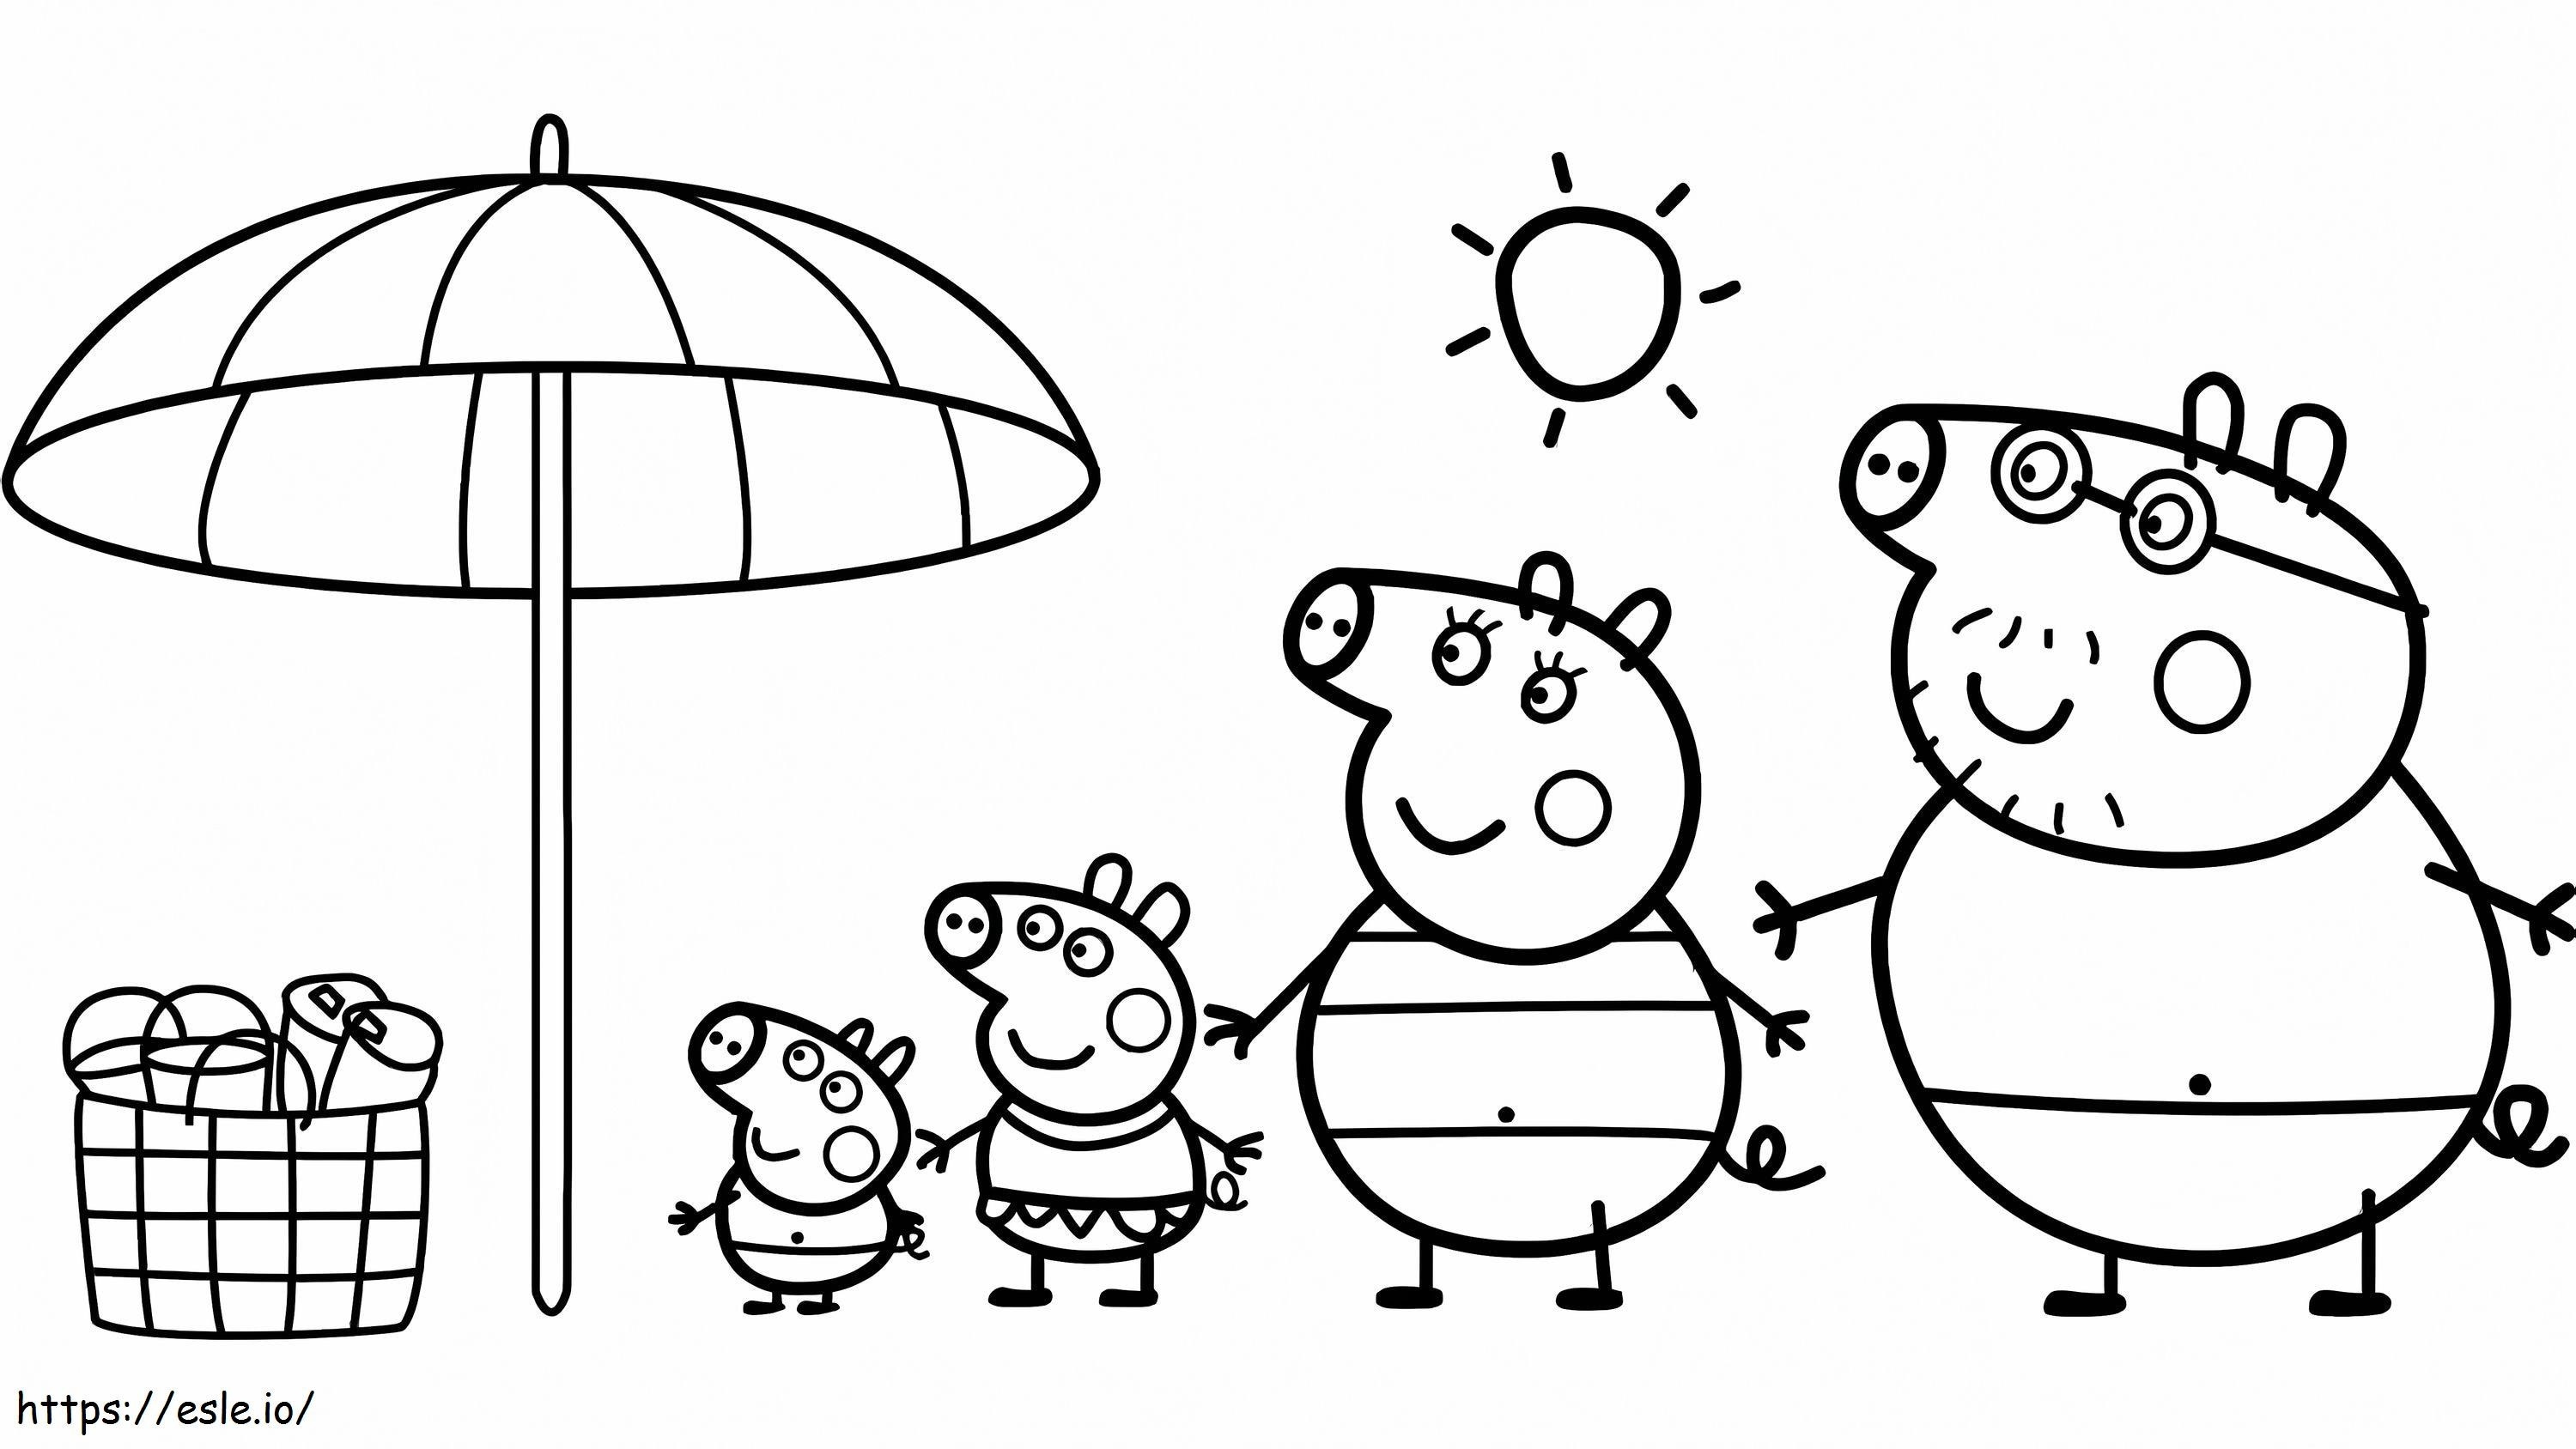 Peppa Pig Family On The Beach coloring page